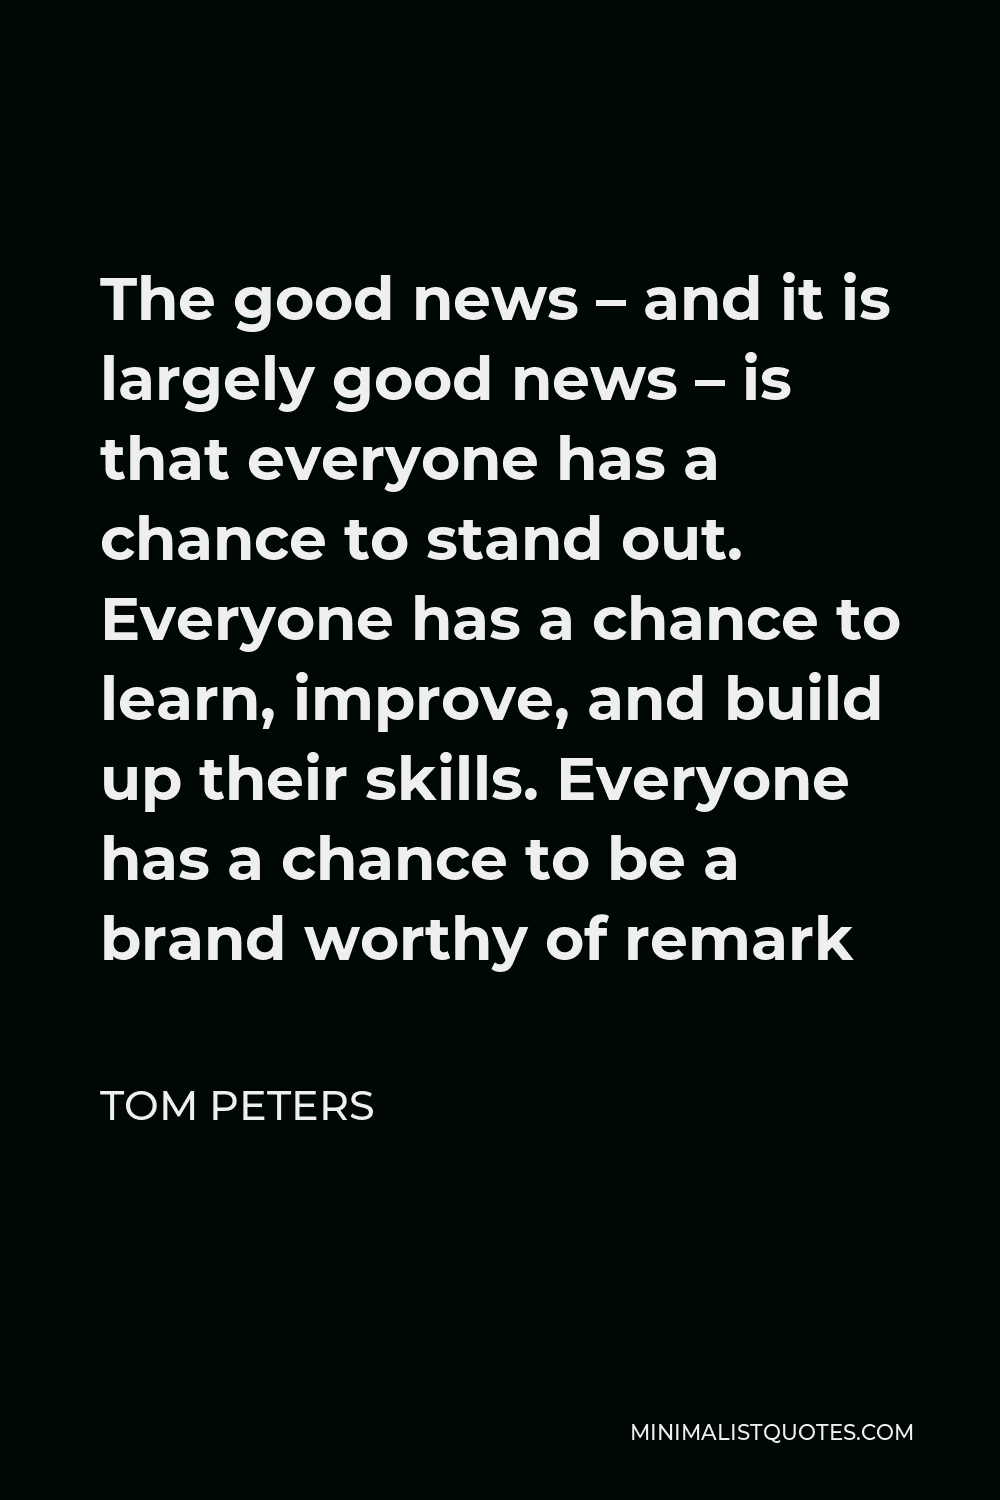 Tom Peters Quote - The good news – and it is largely good news – is that everyone has a chance to stand out. Everyone has a chance to learn, improve, and build up their skills. Everyone has a chance to be a brand worthy of remark